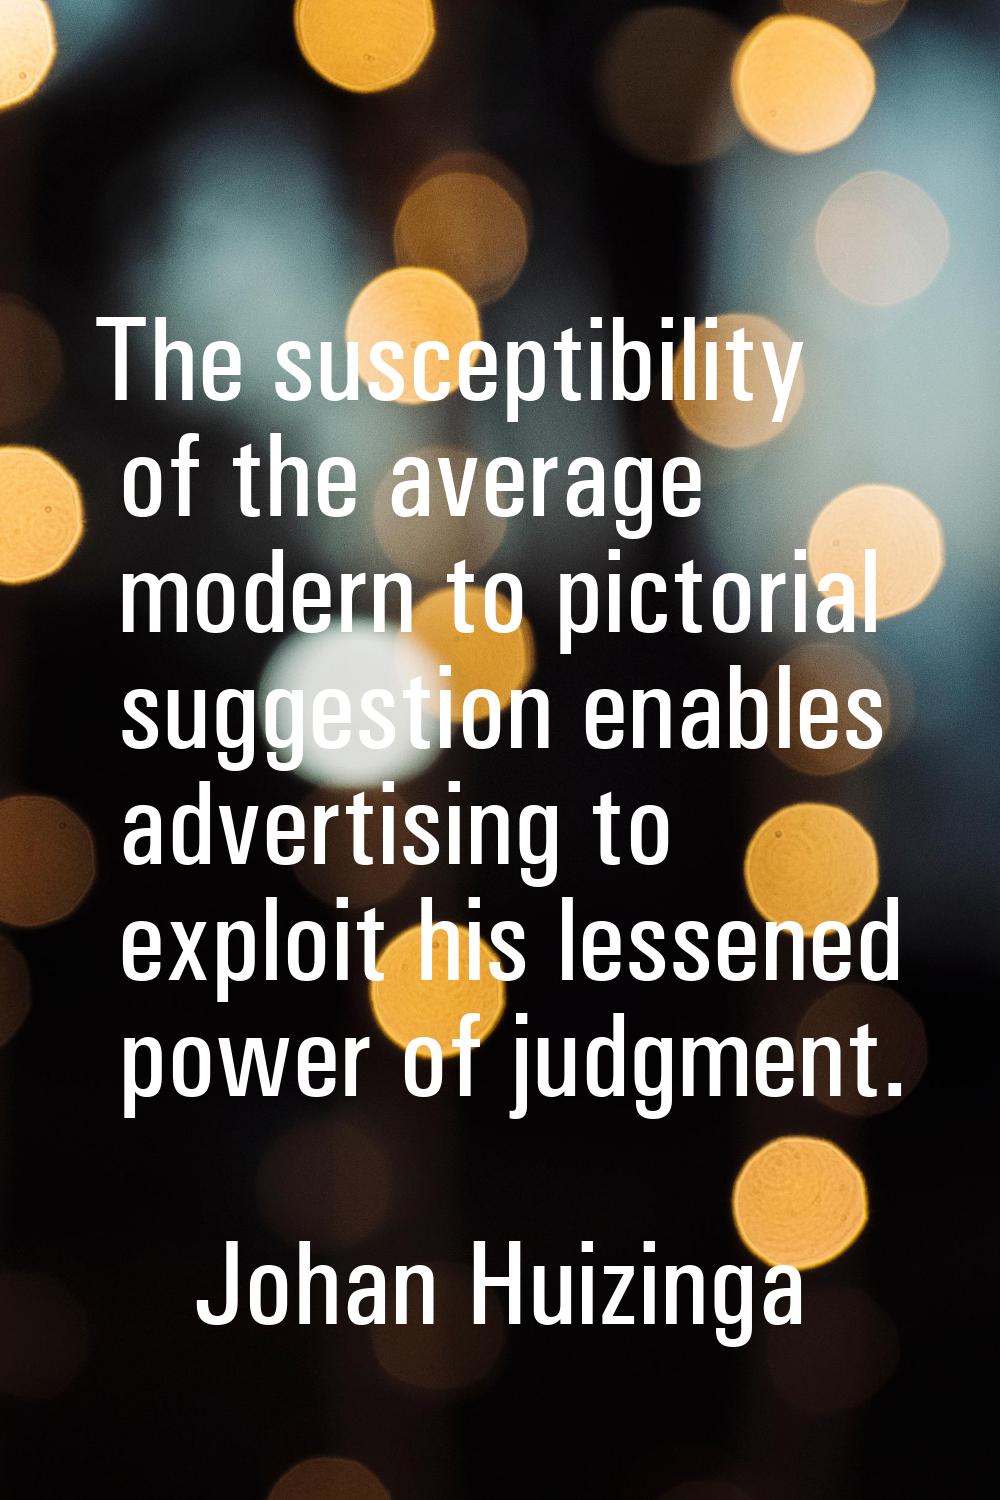 The susceptibility of the average modern to pictorial suggestion enables advertising to exploit his